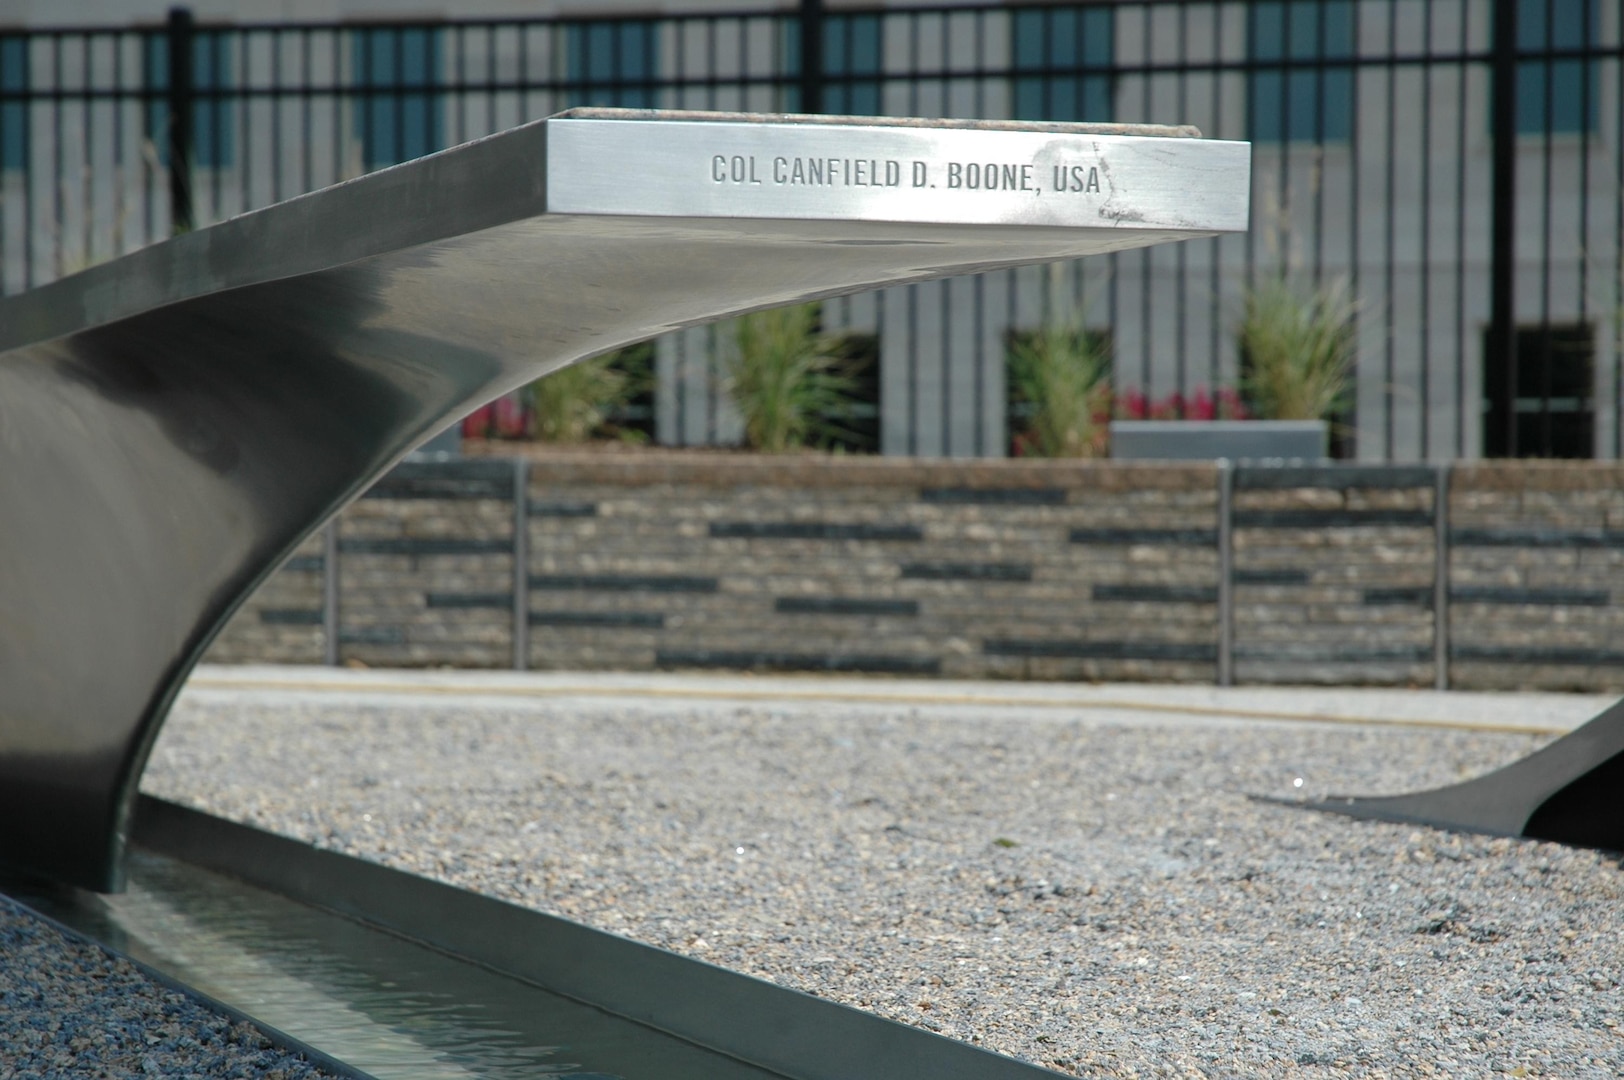 The Pentagon Memorial benches are arranged according to the victims' ages and where they were during the crash. Col. Canfield Boone of the Indiana Army National Guard and Chief Warrant Officer 4 William Ruth of the Maryland Army National Guard were killed at the Pentagon on Sept. 11, 2001. The benches representing the 125 lives lost in the Pentagon are positioned so that the Pentagon is in the background view of a visitor reading the victim's name.